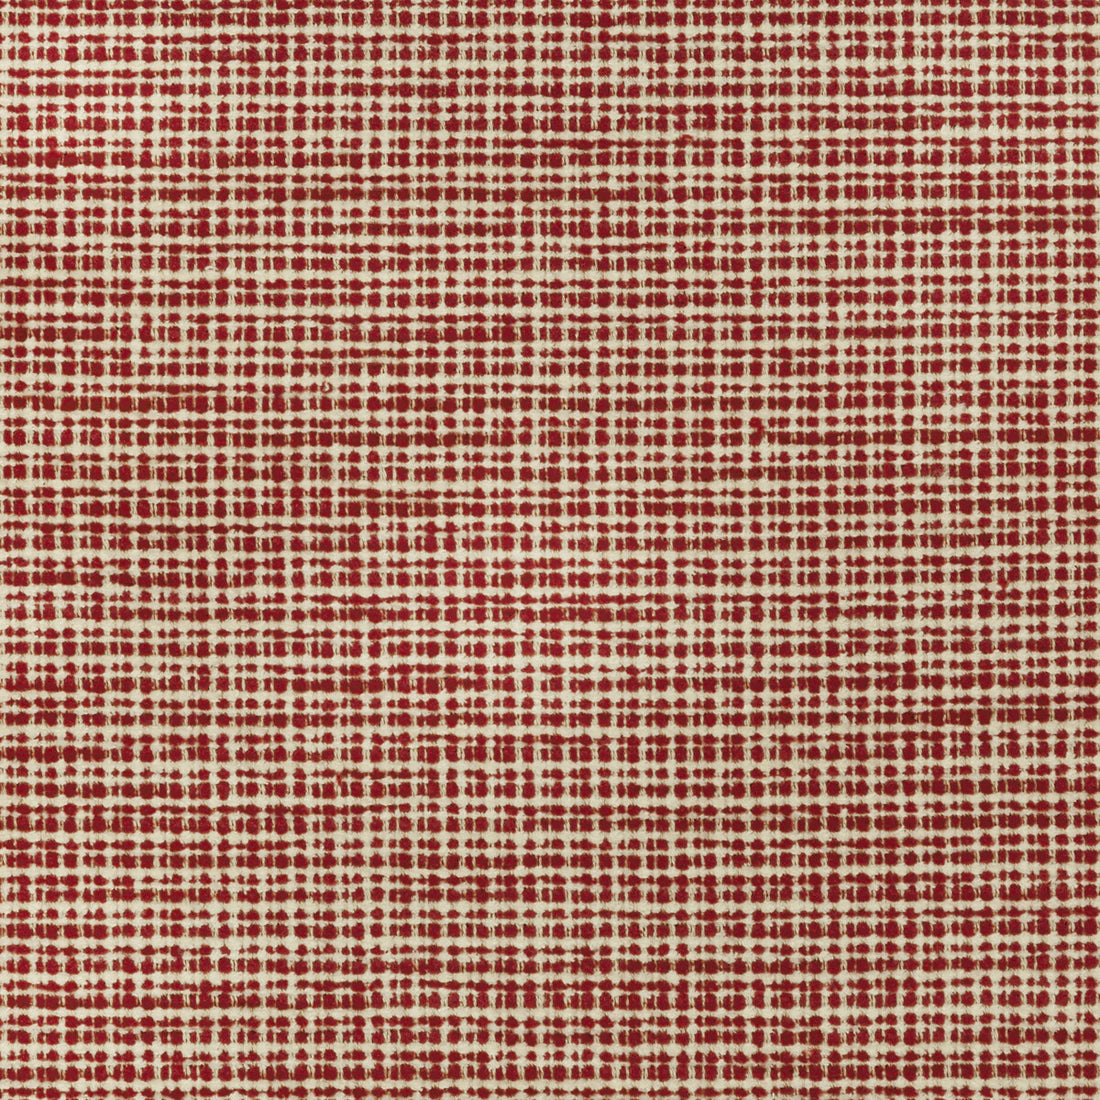 Freney Texture fabric in red color - pattern 8019149.19.0 - by Brunschwig &amp; Fils in the Chambery Textures II collection